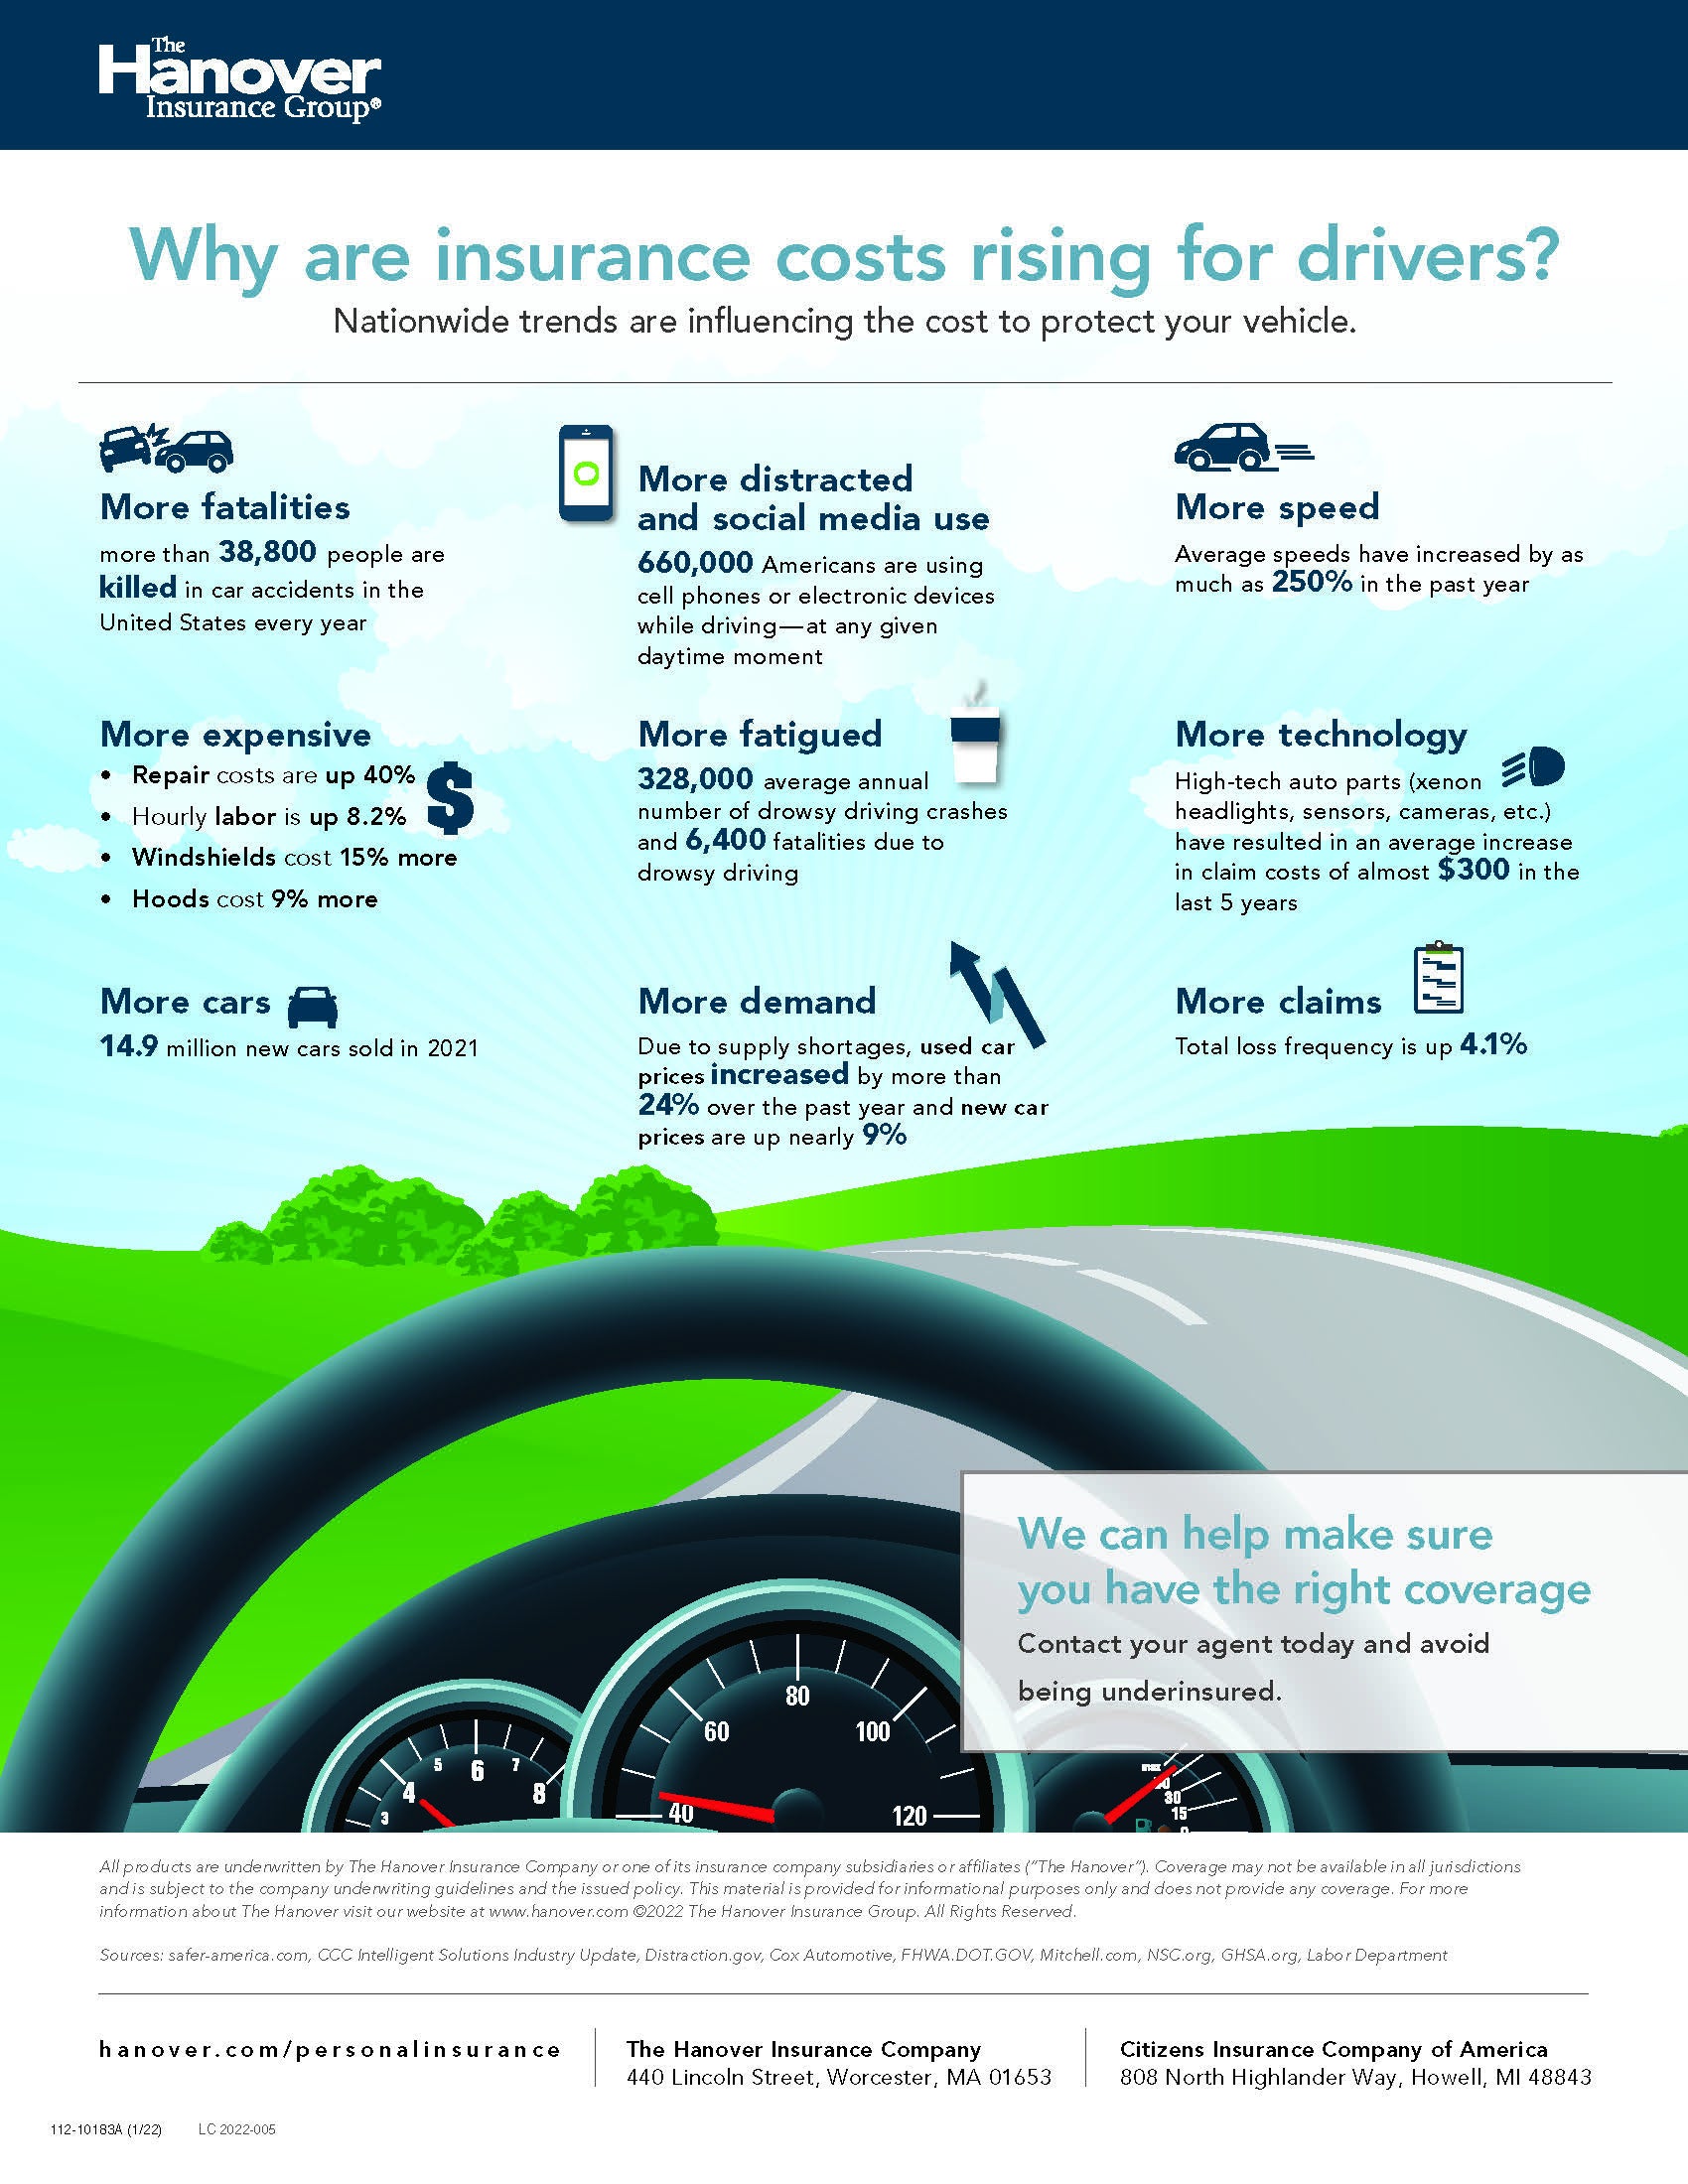 Why am I paying more for auto insurance? | The Hanover Insurance Group